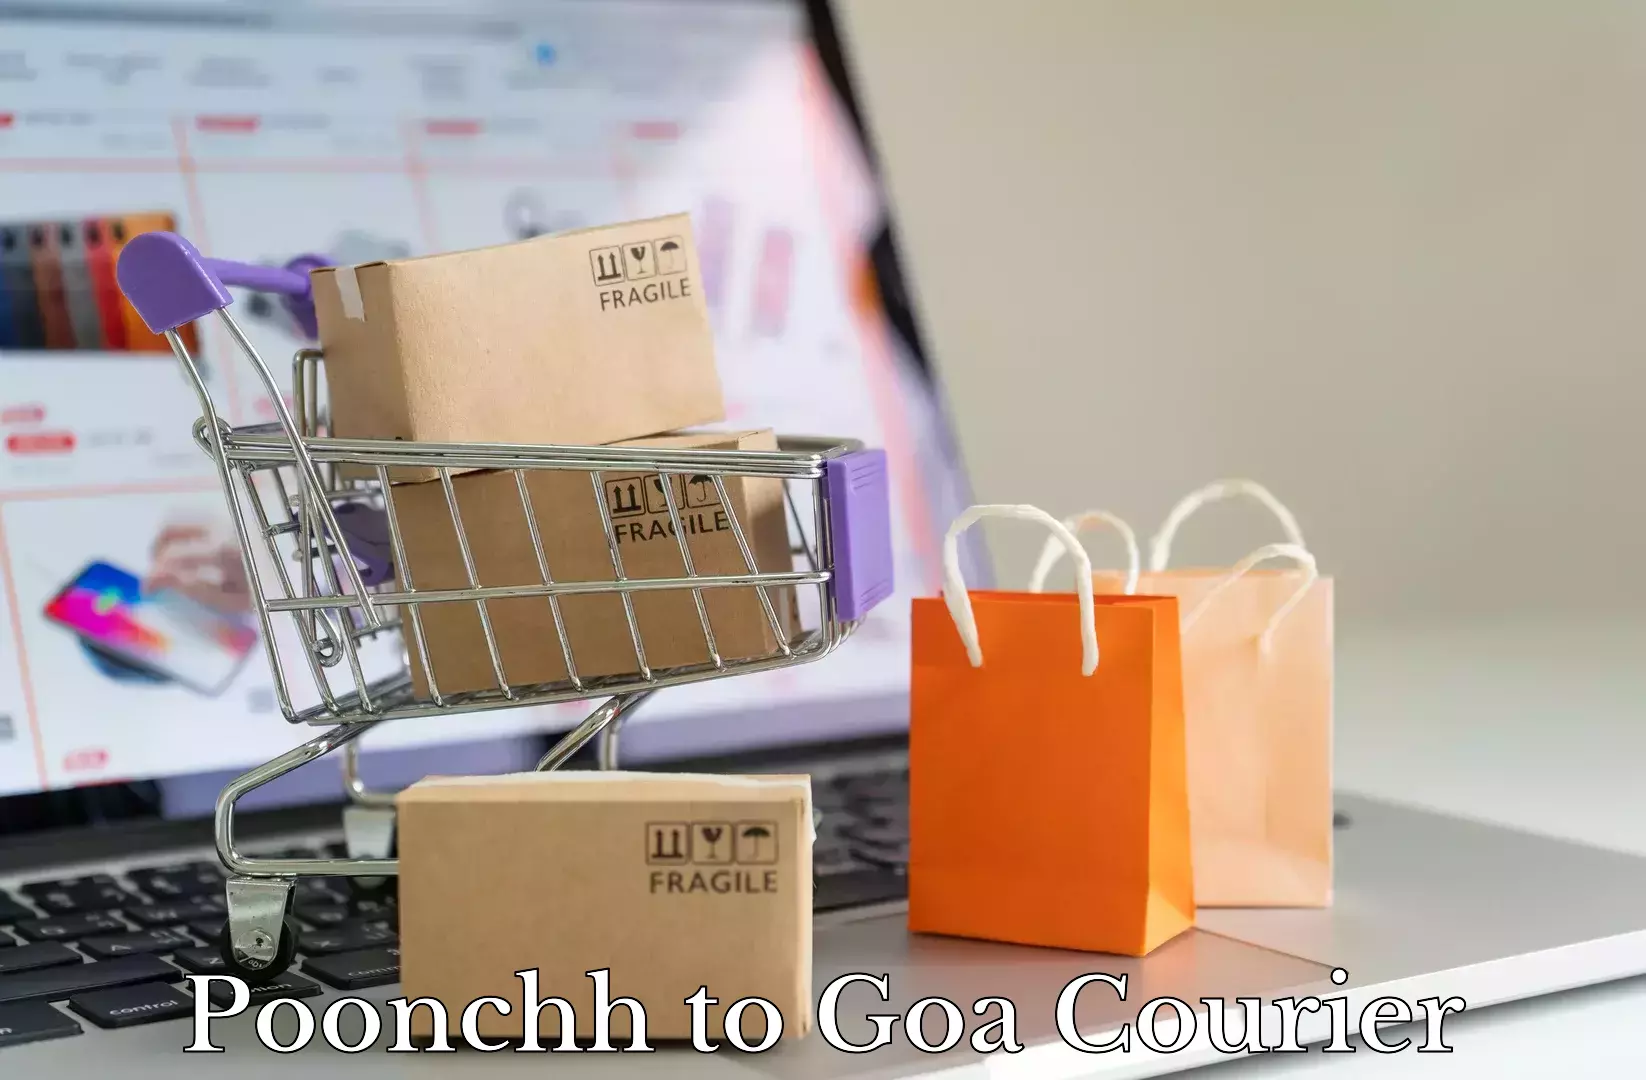 Furniture delivery service Poonchh to South Goa